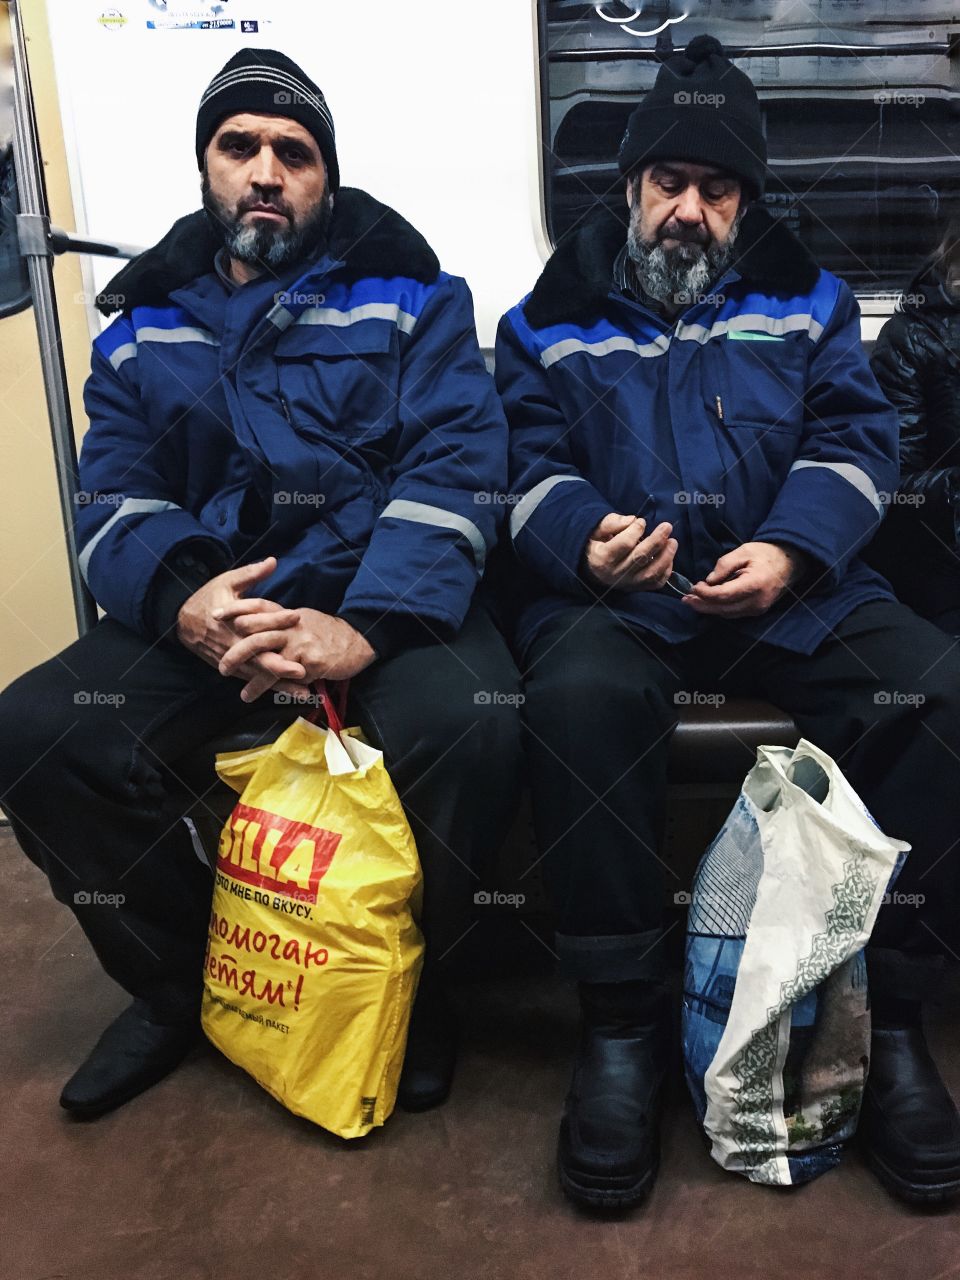 Two arabic guys are sitting in subway in subway services uniform